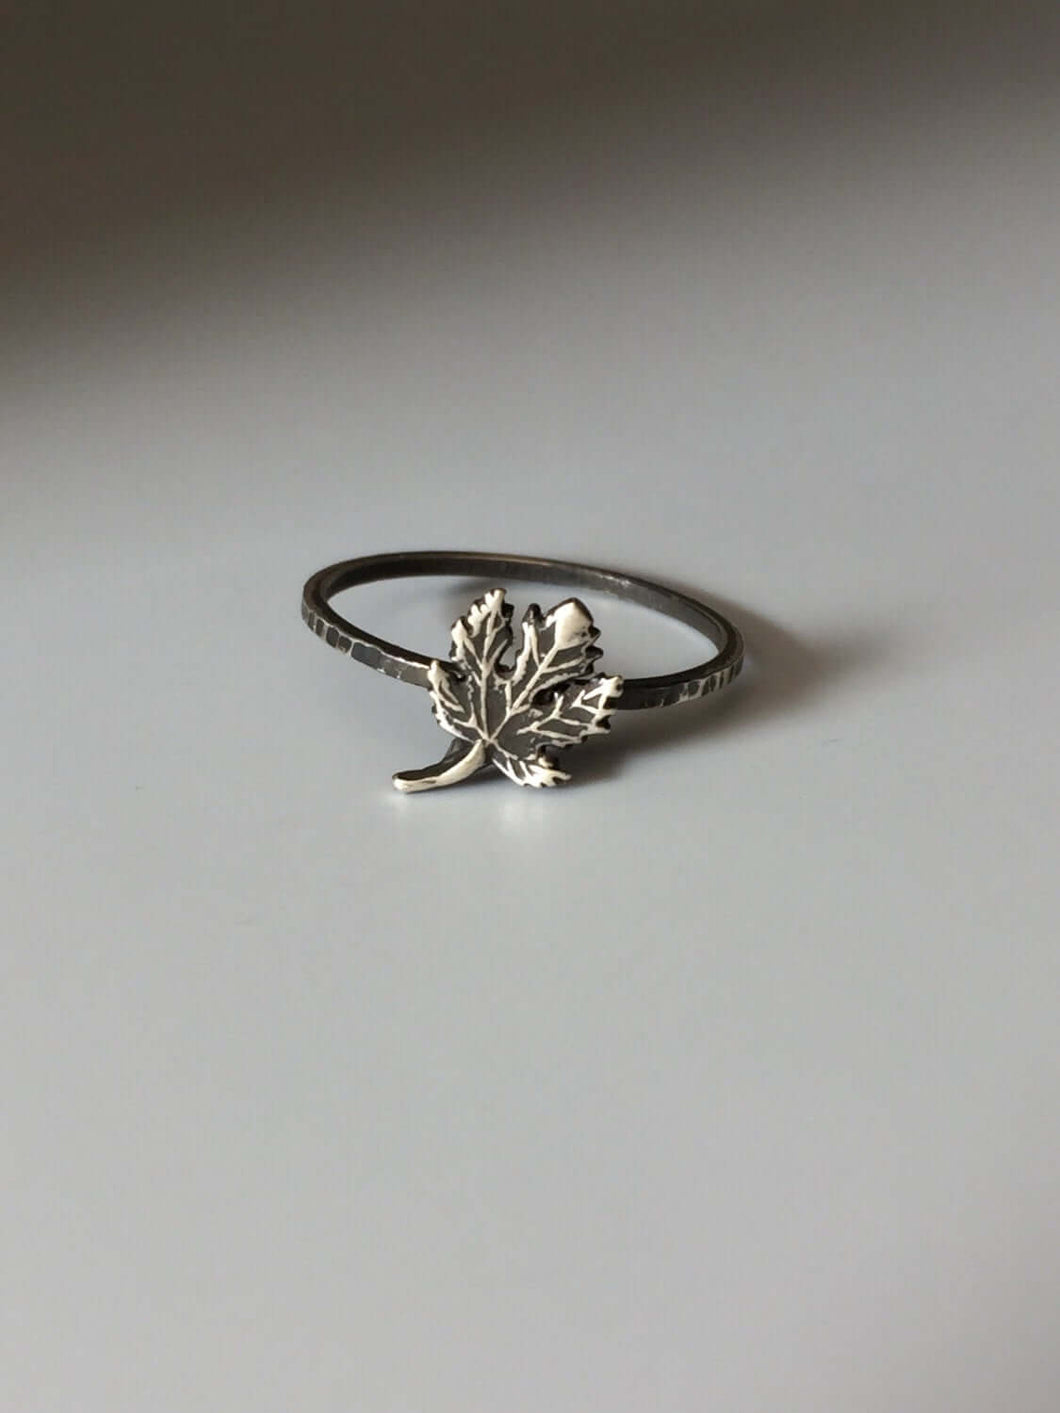 Maple Leaf Stacking Ring. Sterling silver stacker jewelry mix and match. Fall leaves leaf foliage nature natural hippie jewelry.